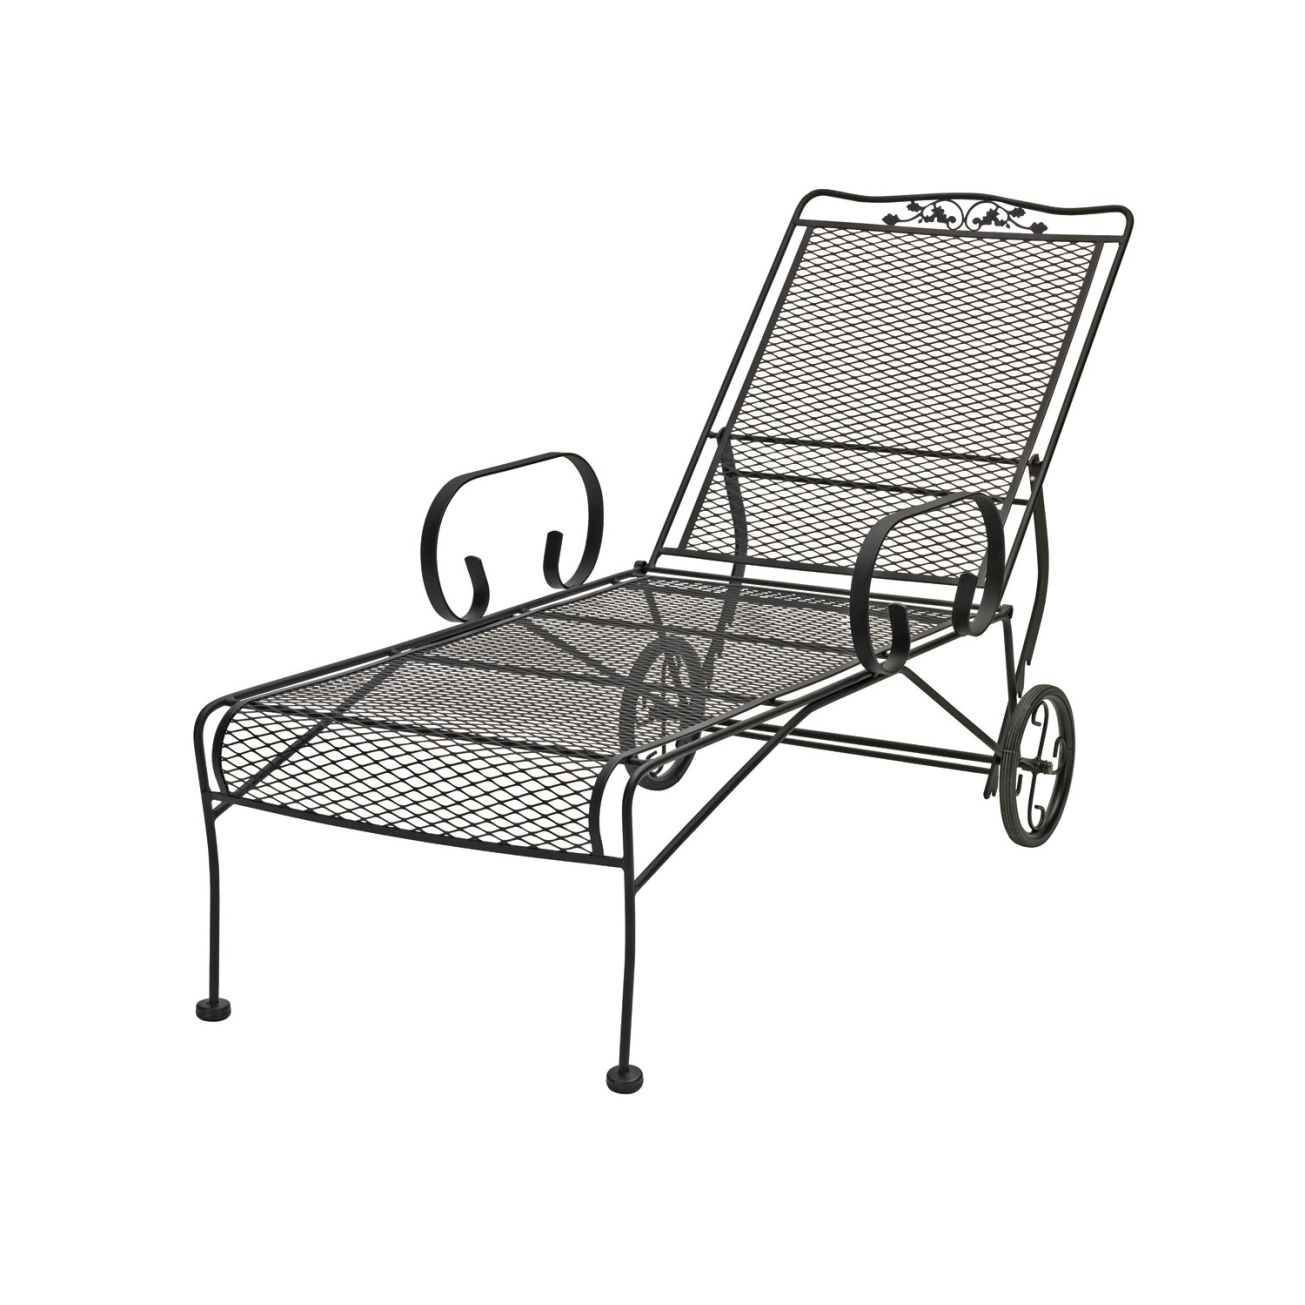 Metal Lounge Chairs Patio • Lounge Chairs Ideas Within Current Metal Chaise Lounge (View 1 of 15)